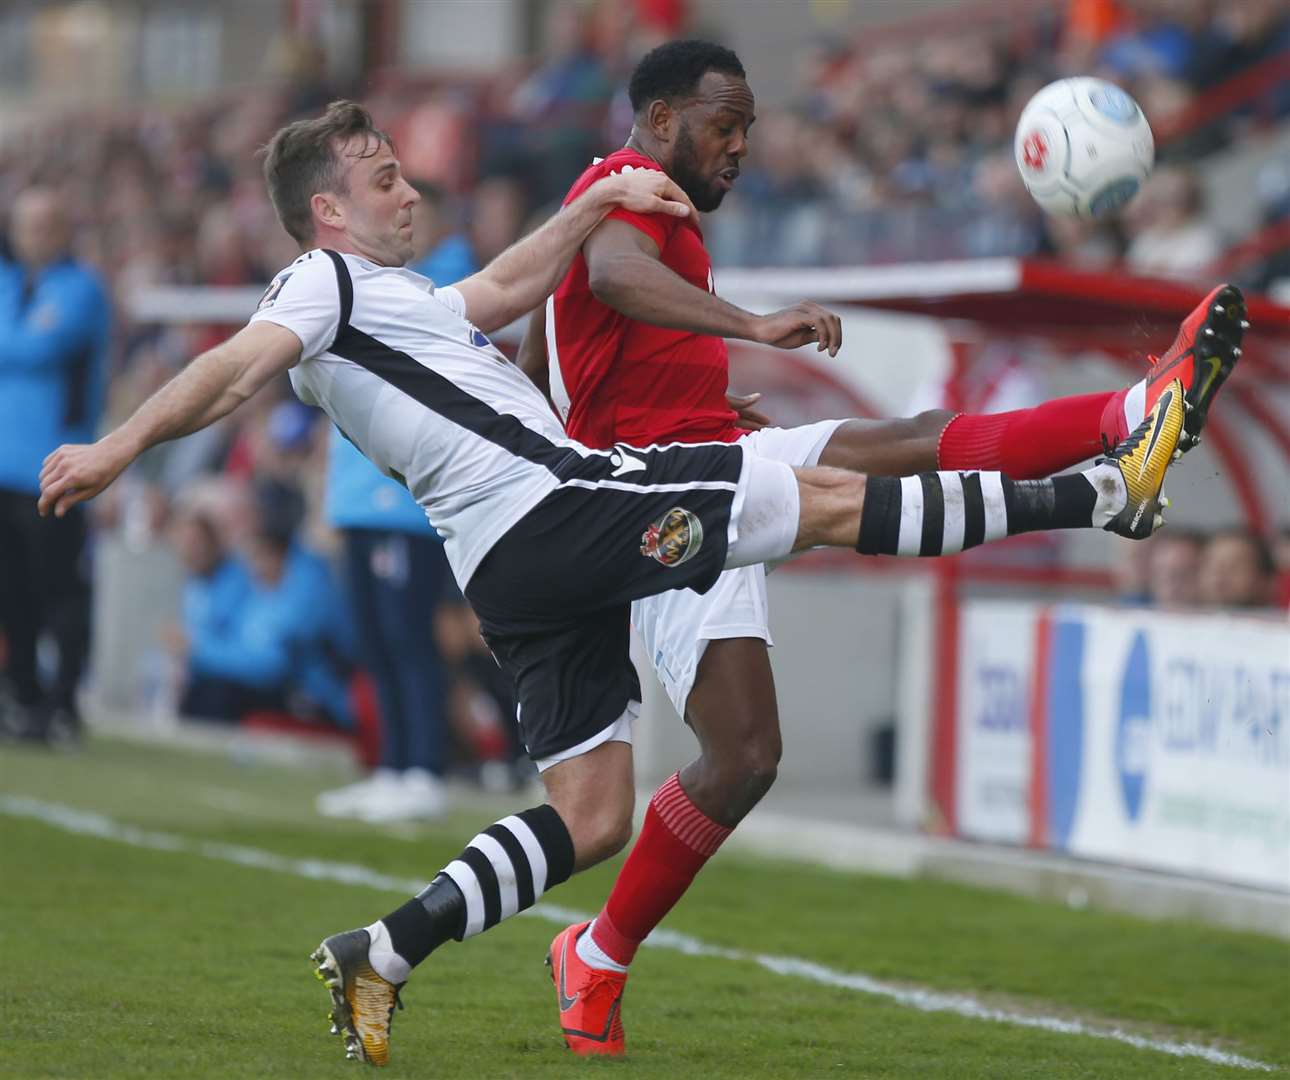 Myles Weston, in action against Wrexham last season, is staying at Ebbsfleet for the new campaign. Picture: Andy Jones